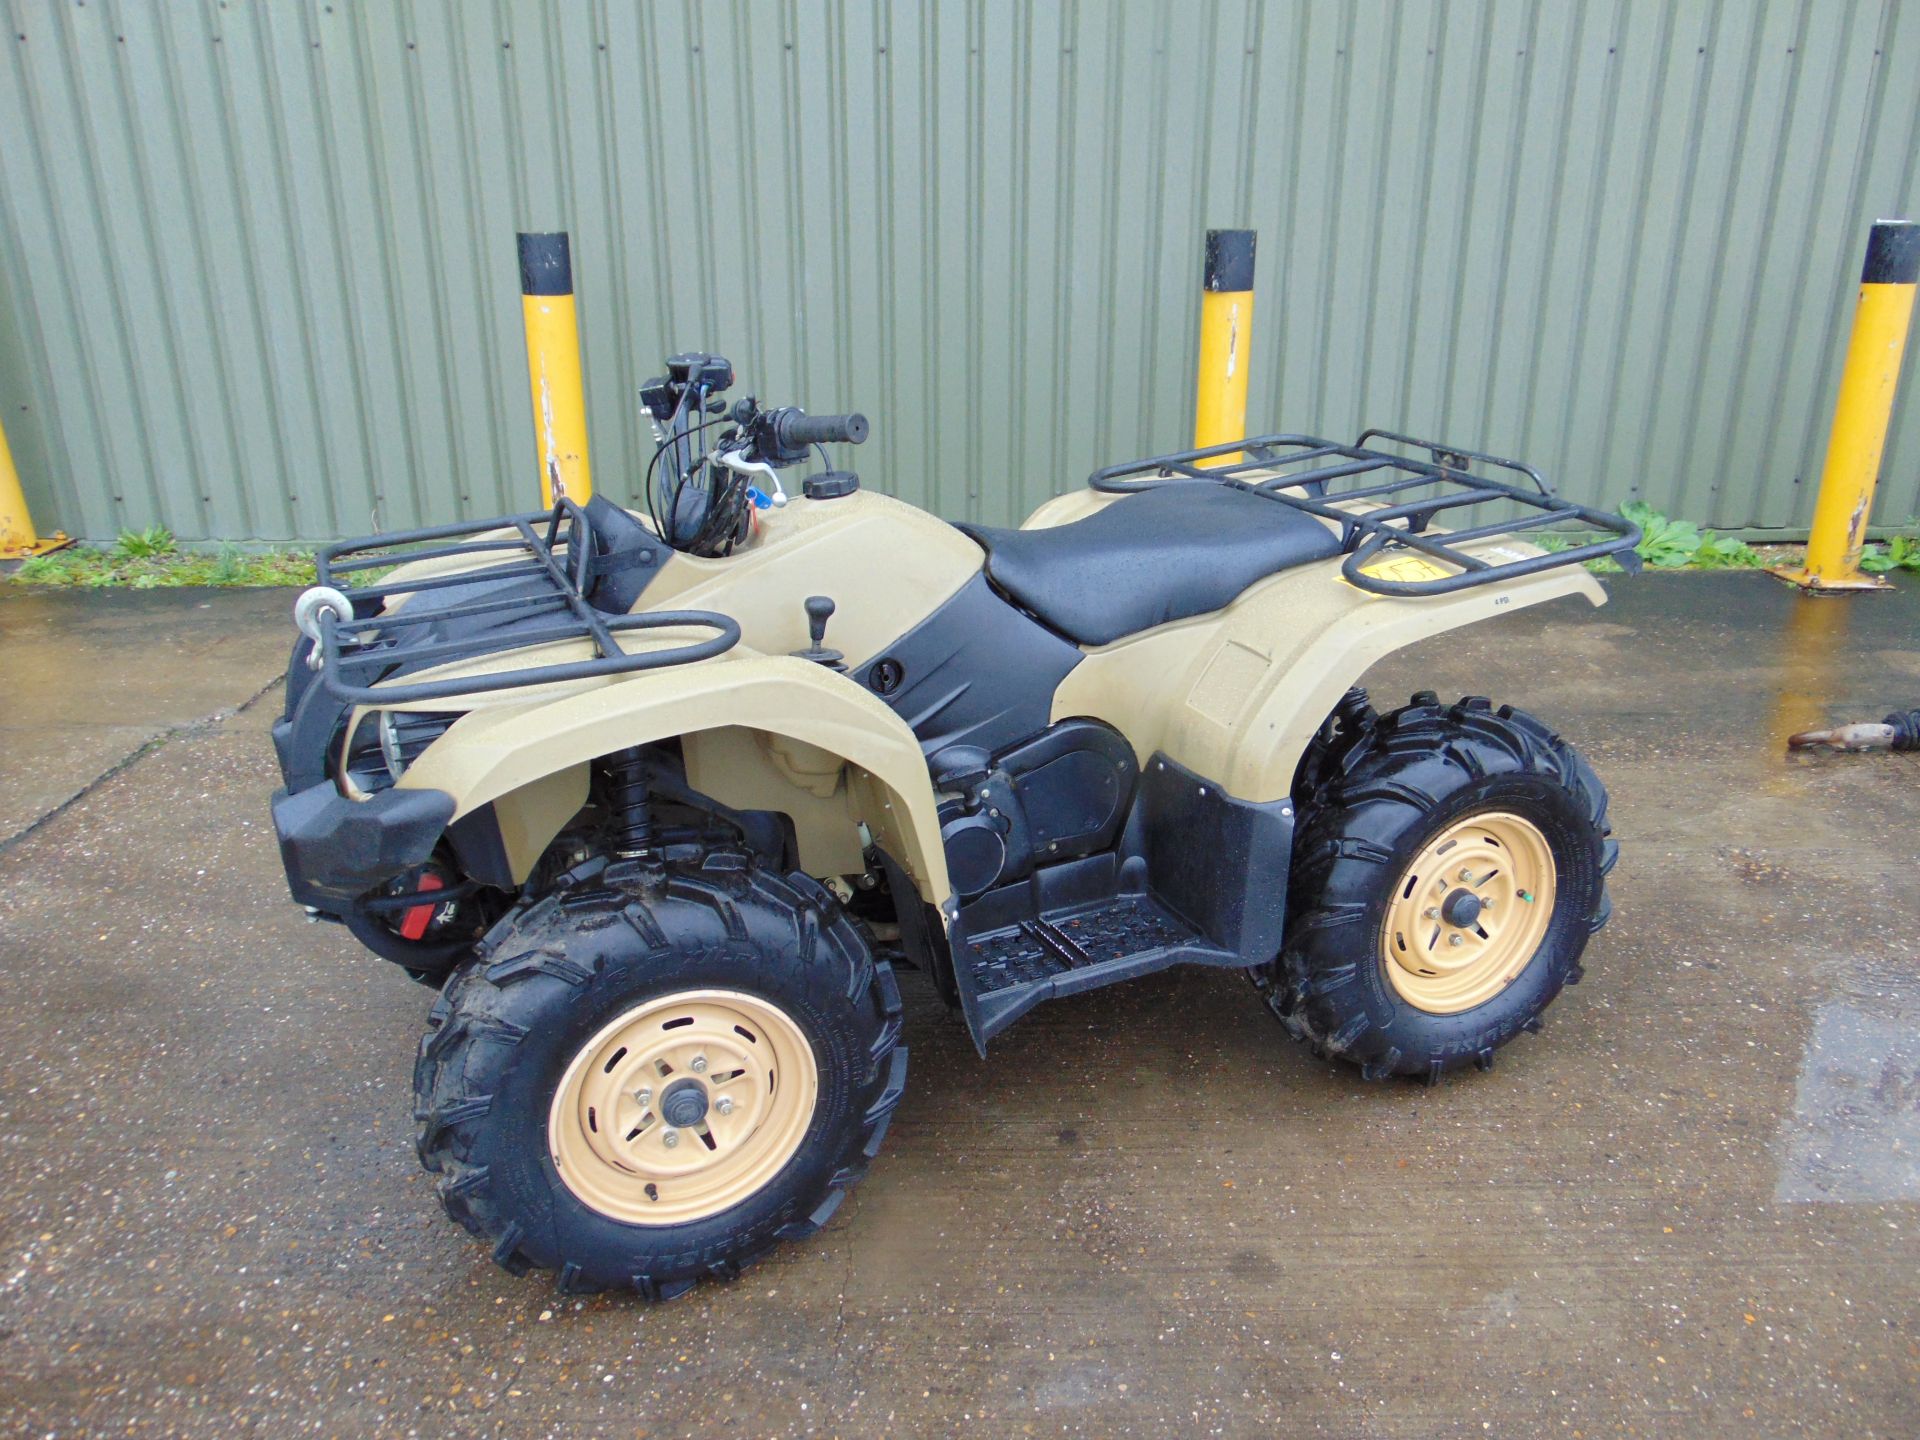 Yamaha Grizzly 450 4 x 4 ATV Quad Bike 1518 hours only from MOD - Image 2 of 24